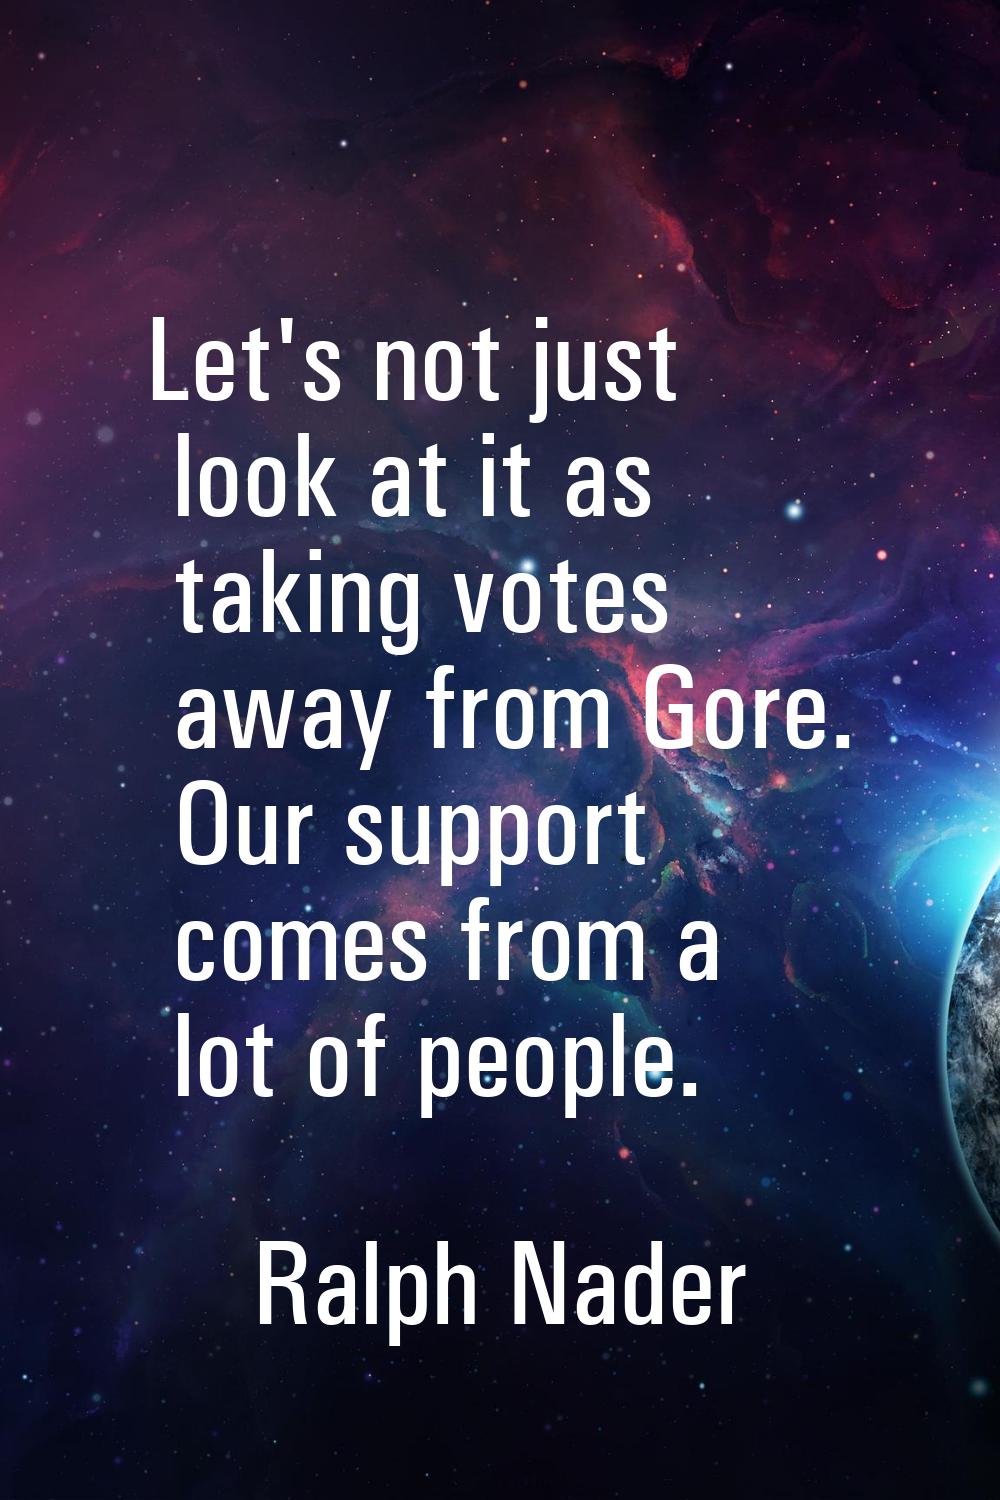 Let's not just look at it as taking votes away from Gore. Our support comes from a lot of people.